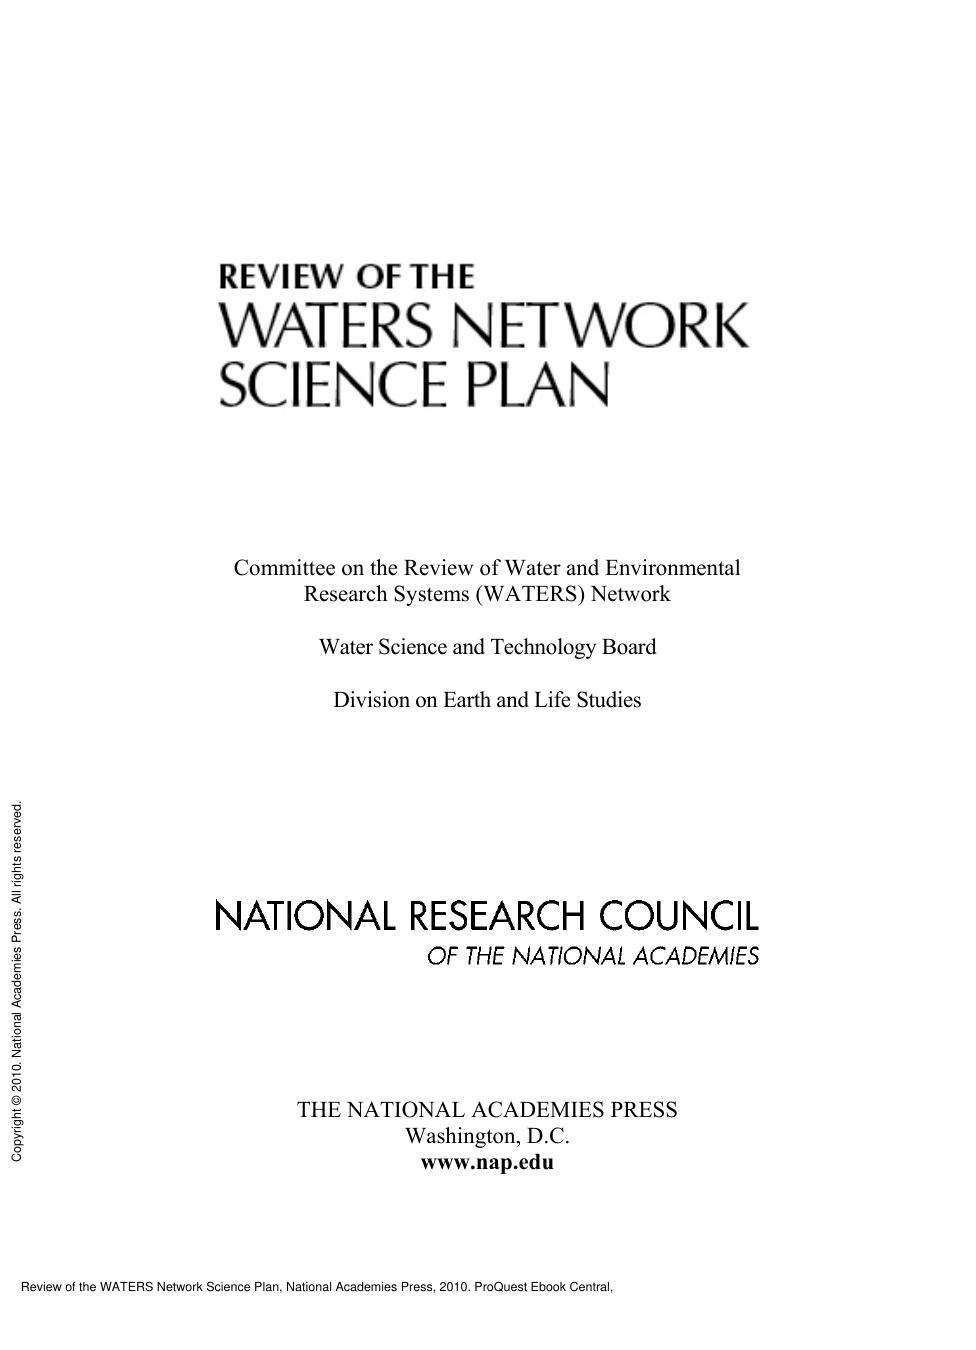 Review of the WATERS Network Science Plan by unknow